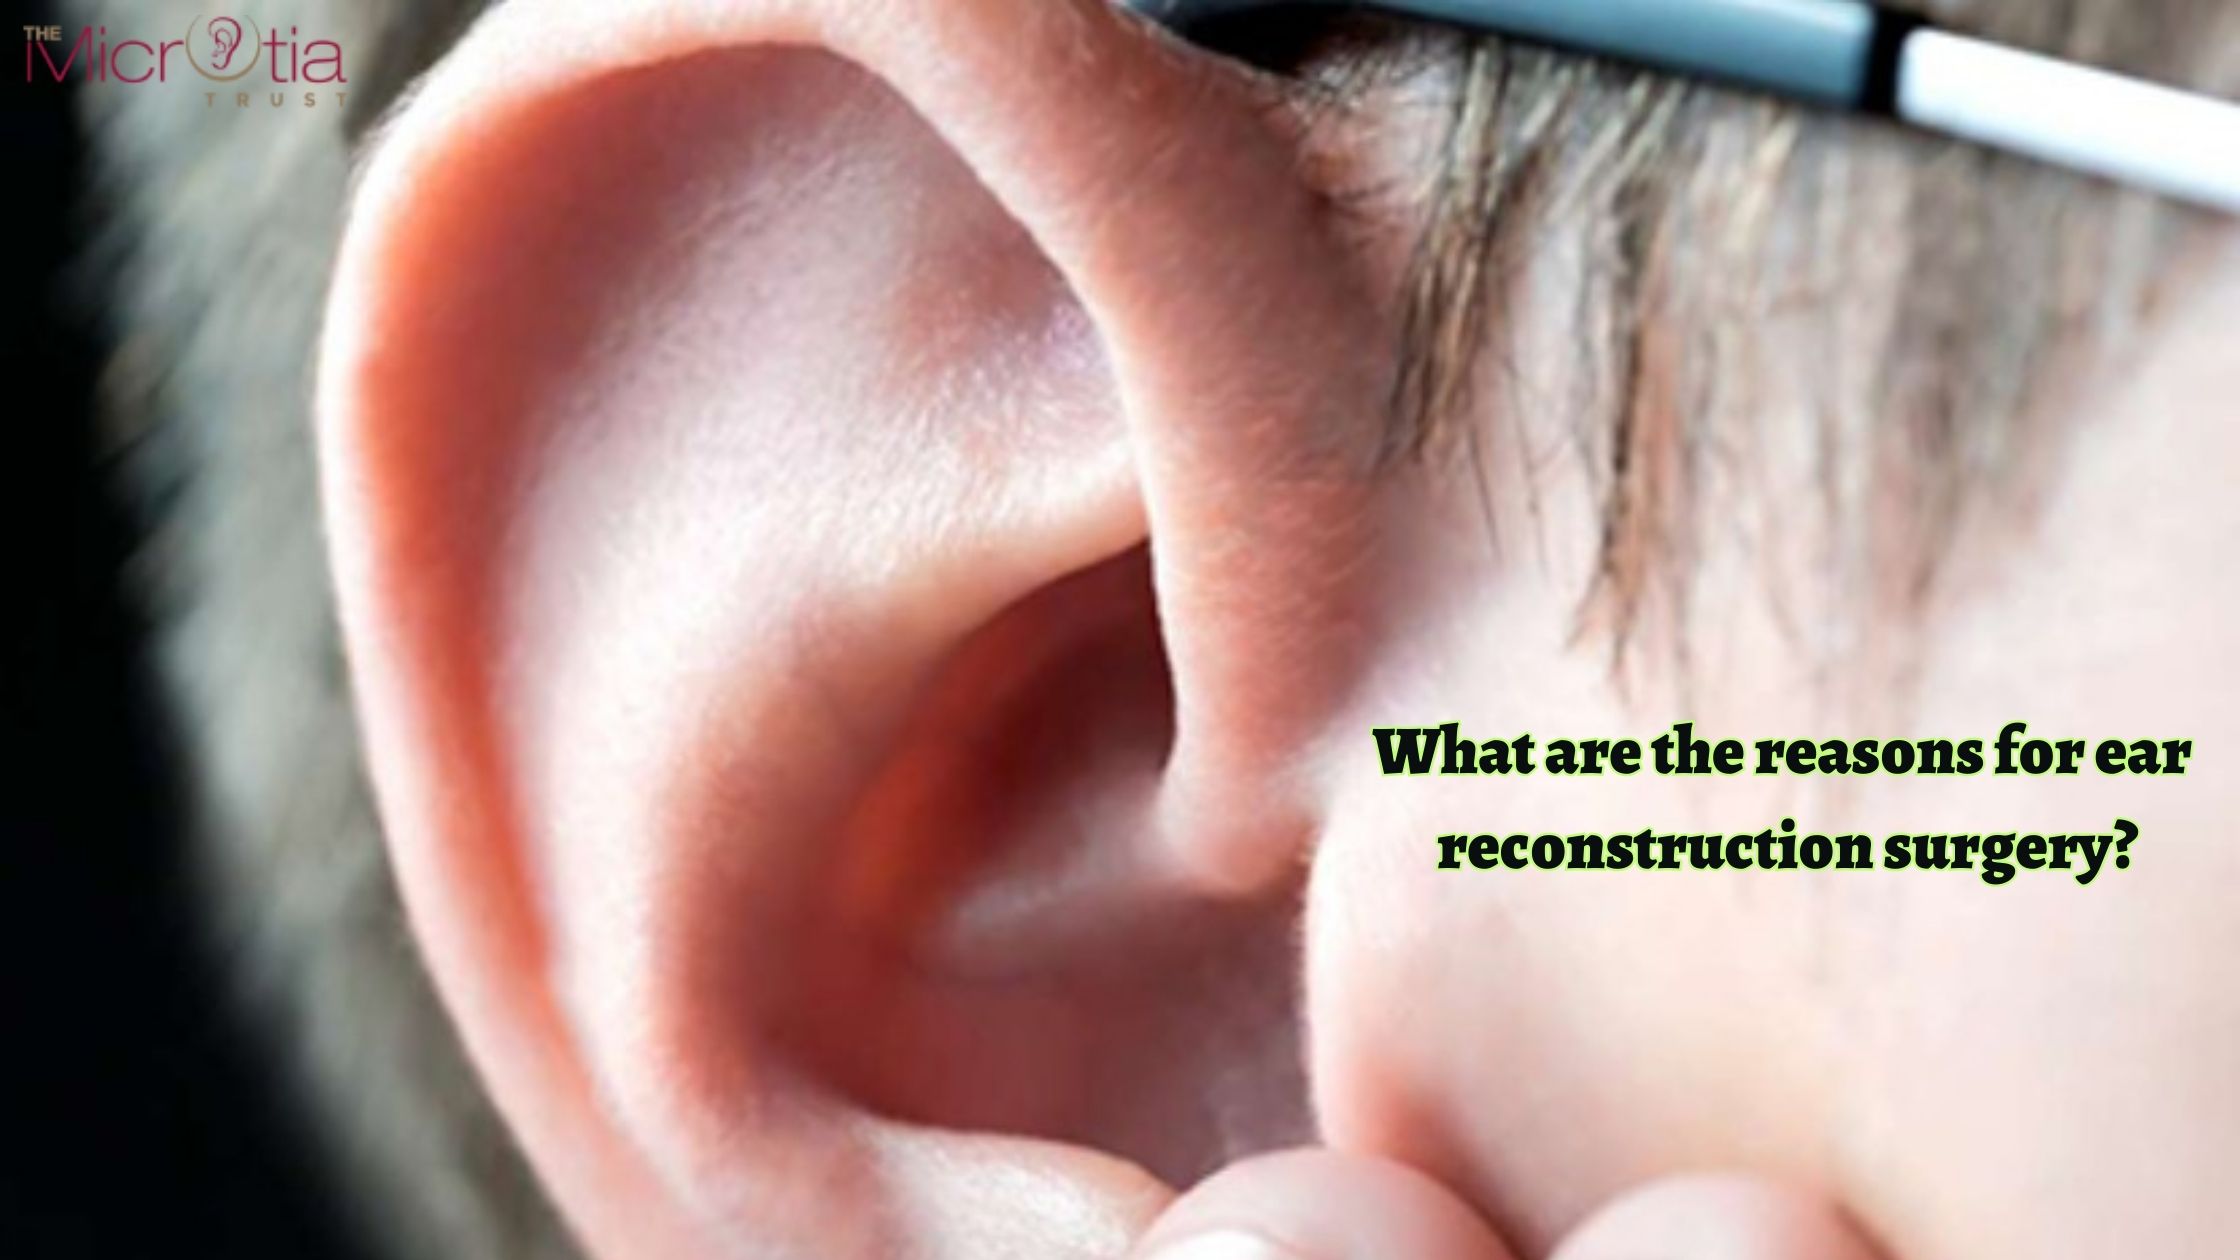 What are the reasons for ear reconstruction surgery